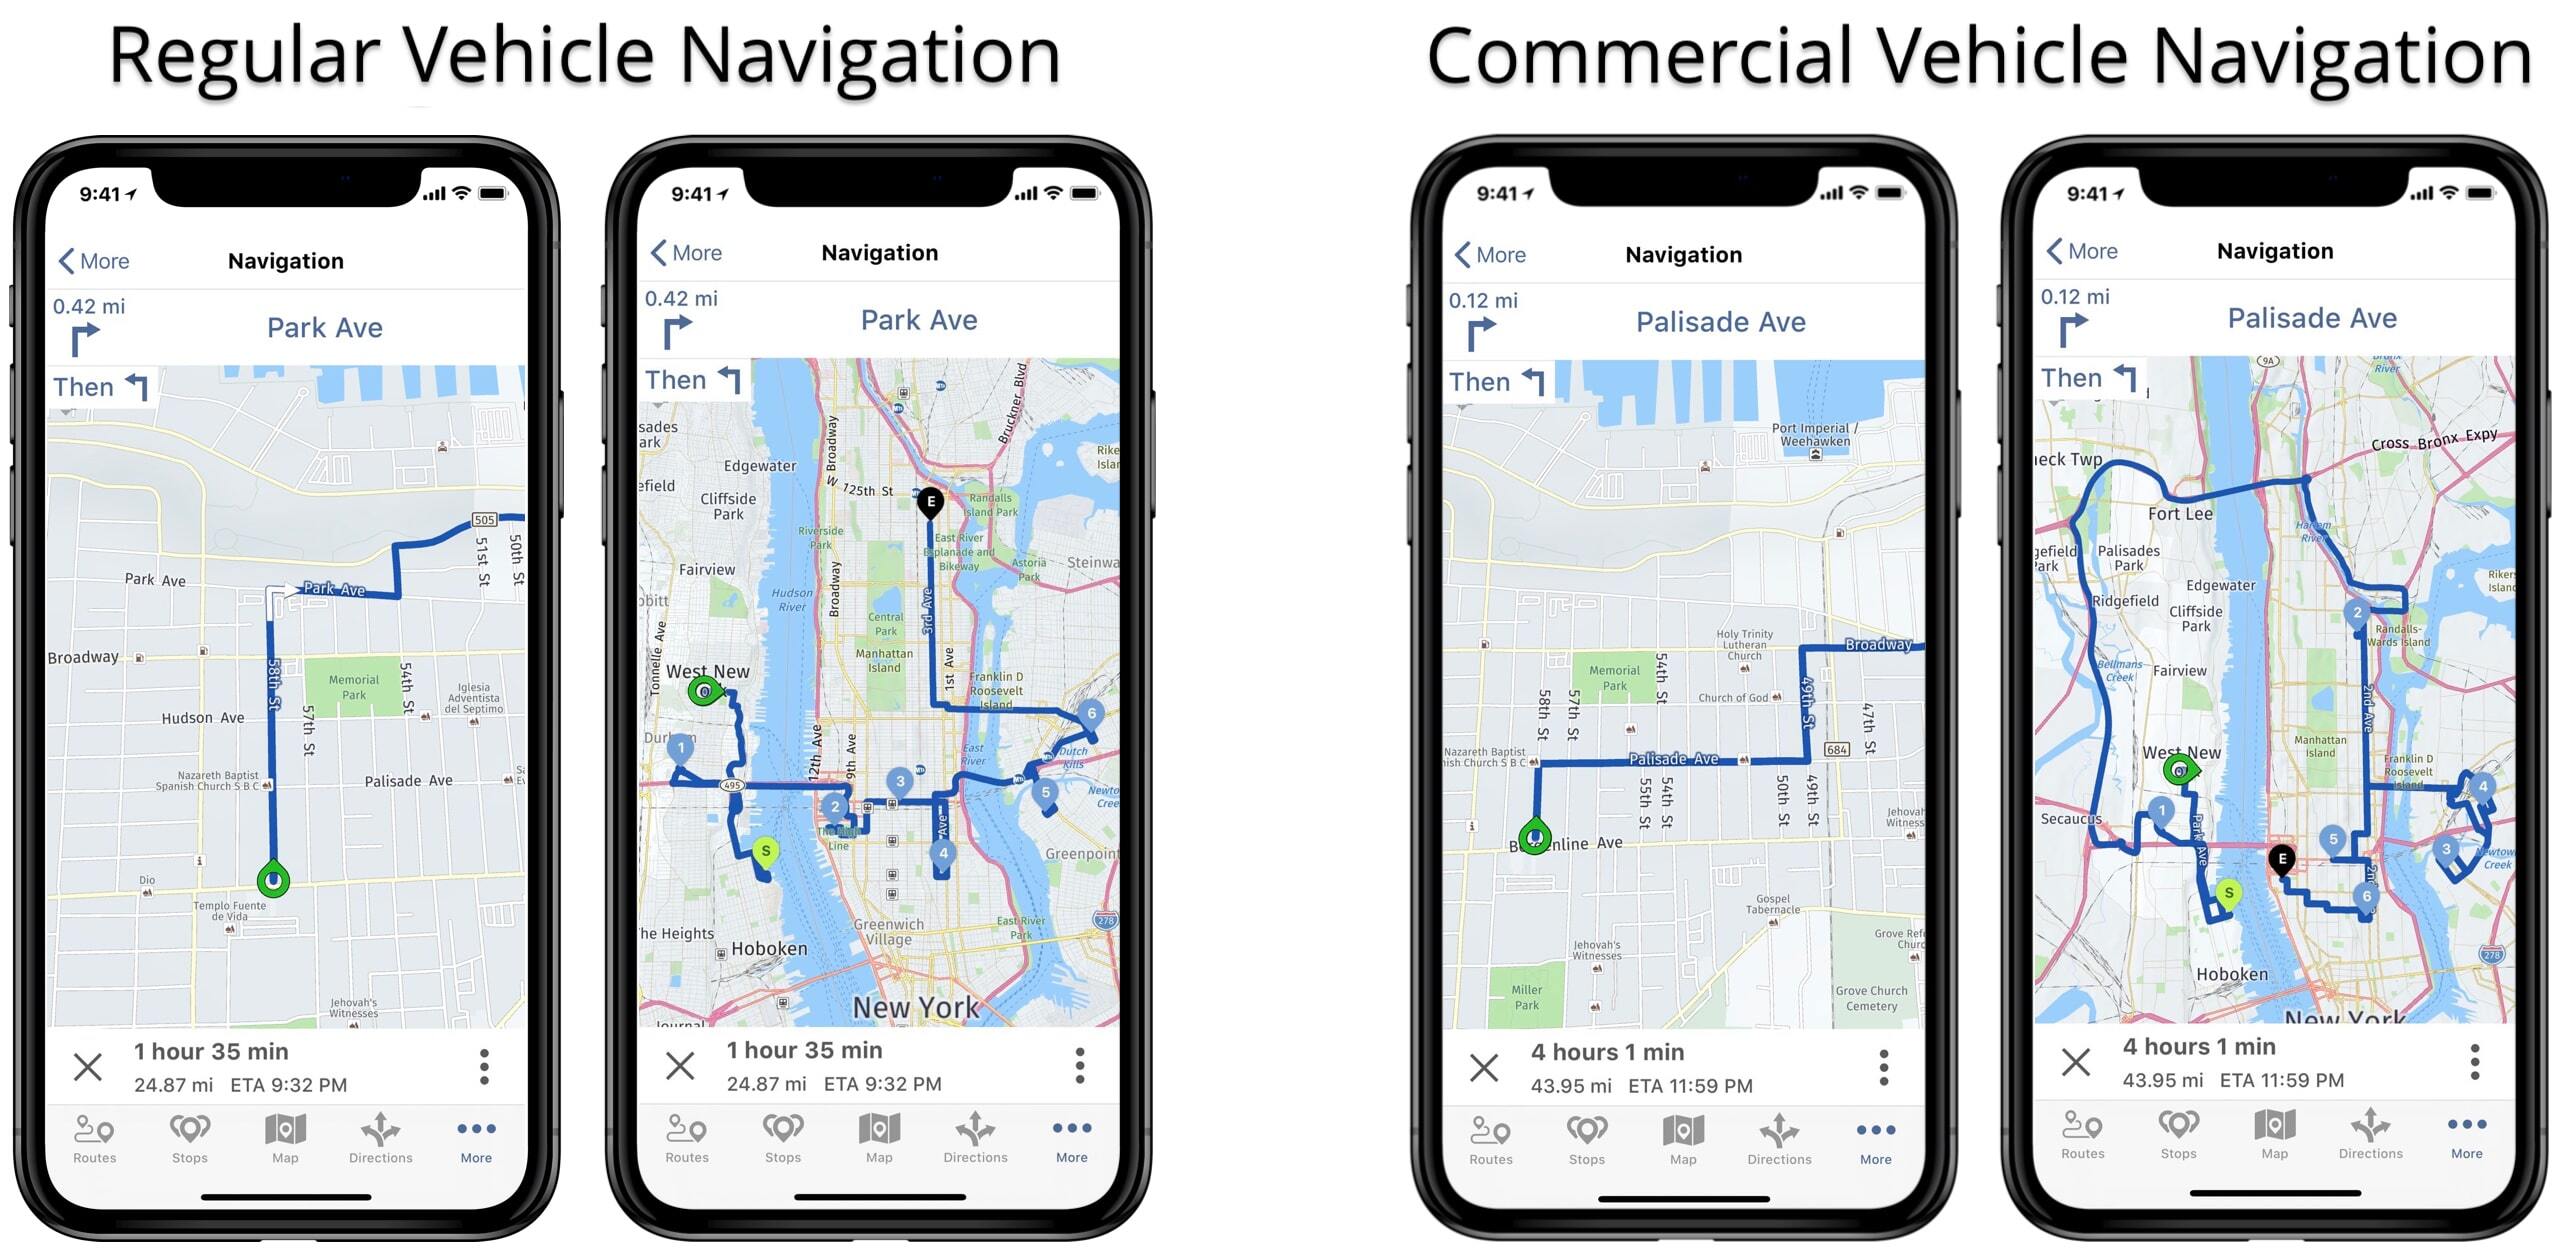 Navigating planned routes for regular vehicles vs navigating truck routes or commercial vehicle routes.